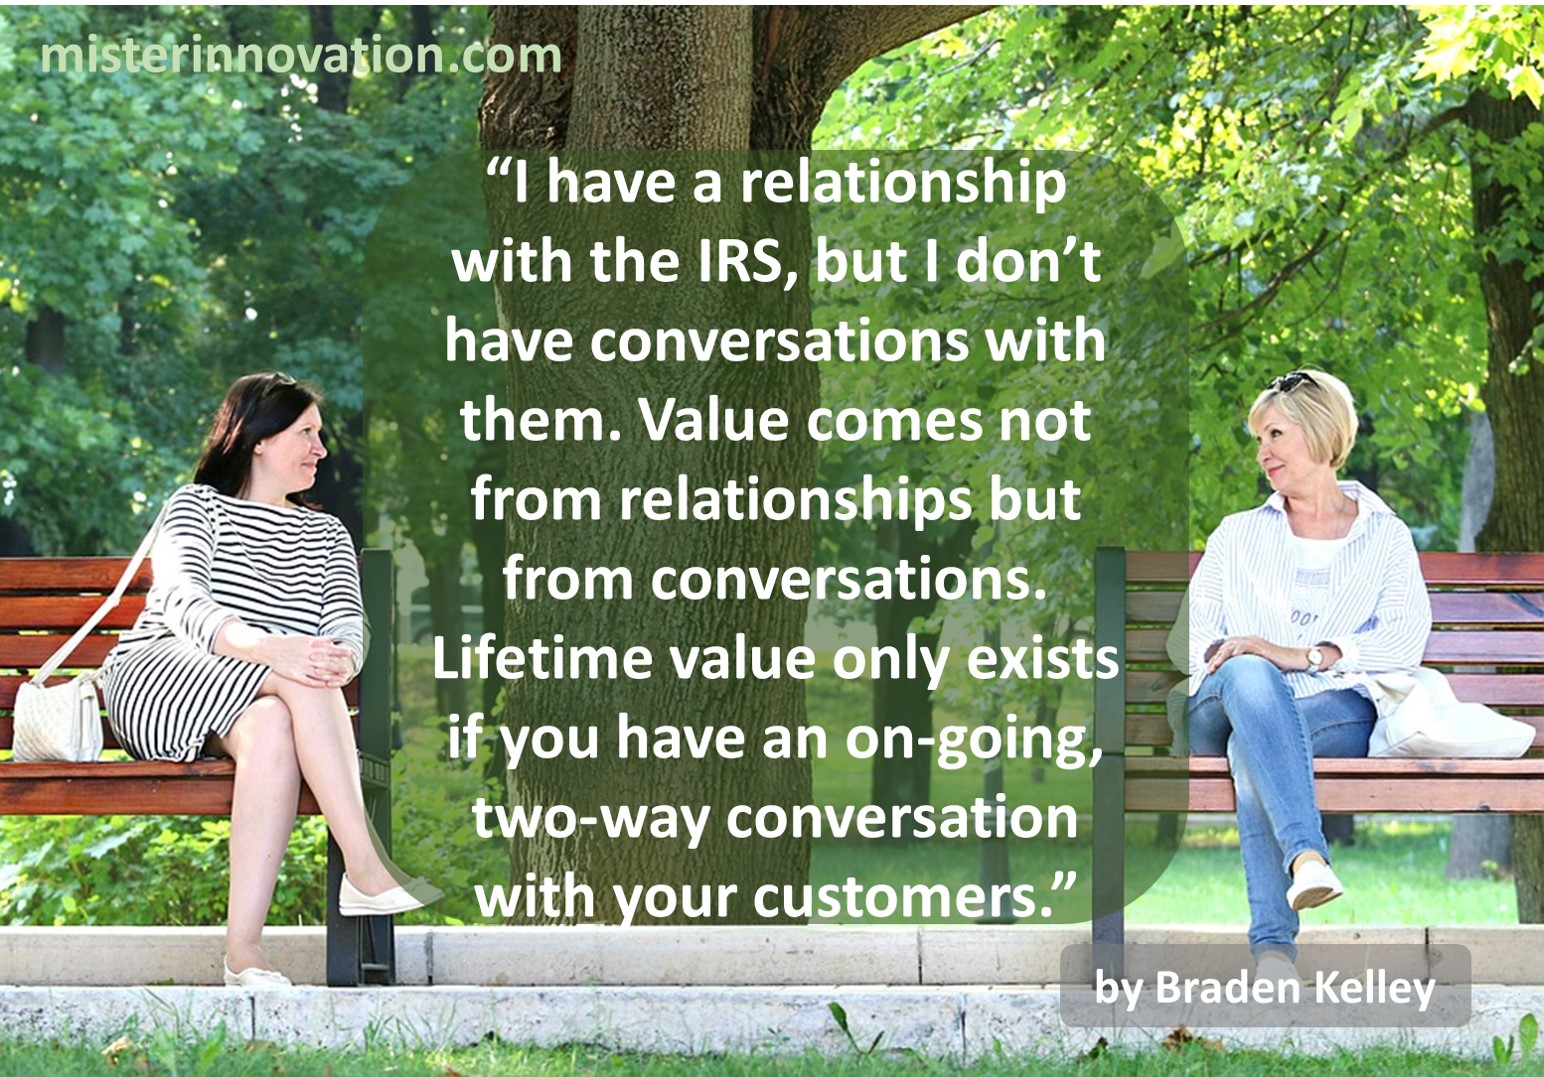 Relationships and Conversations Lifetime Value